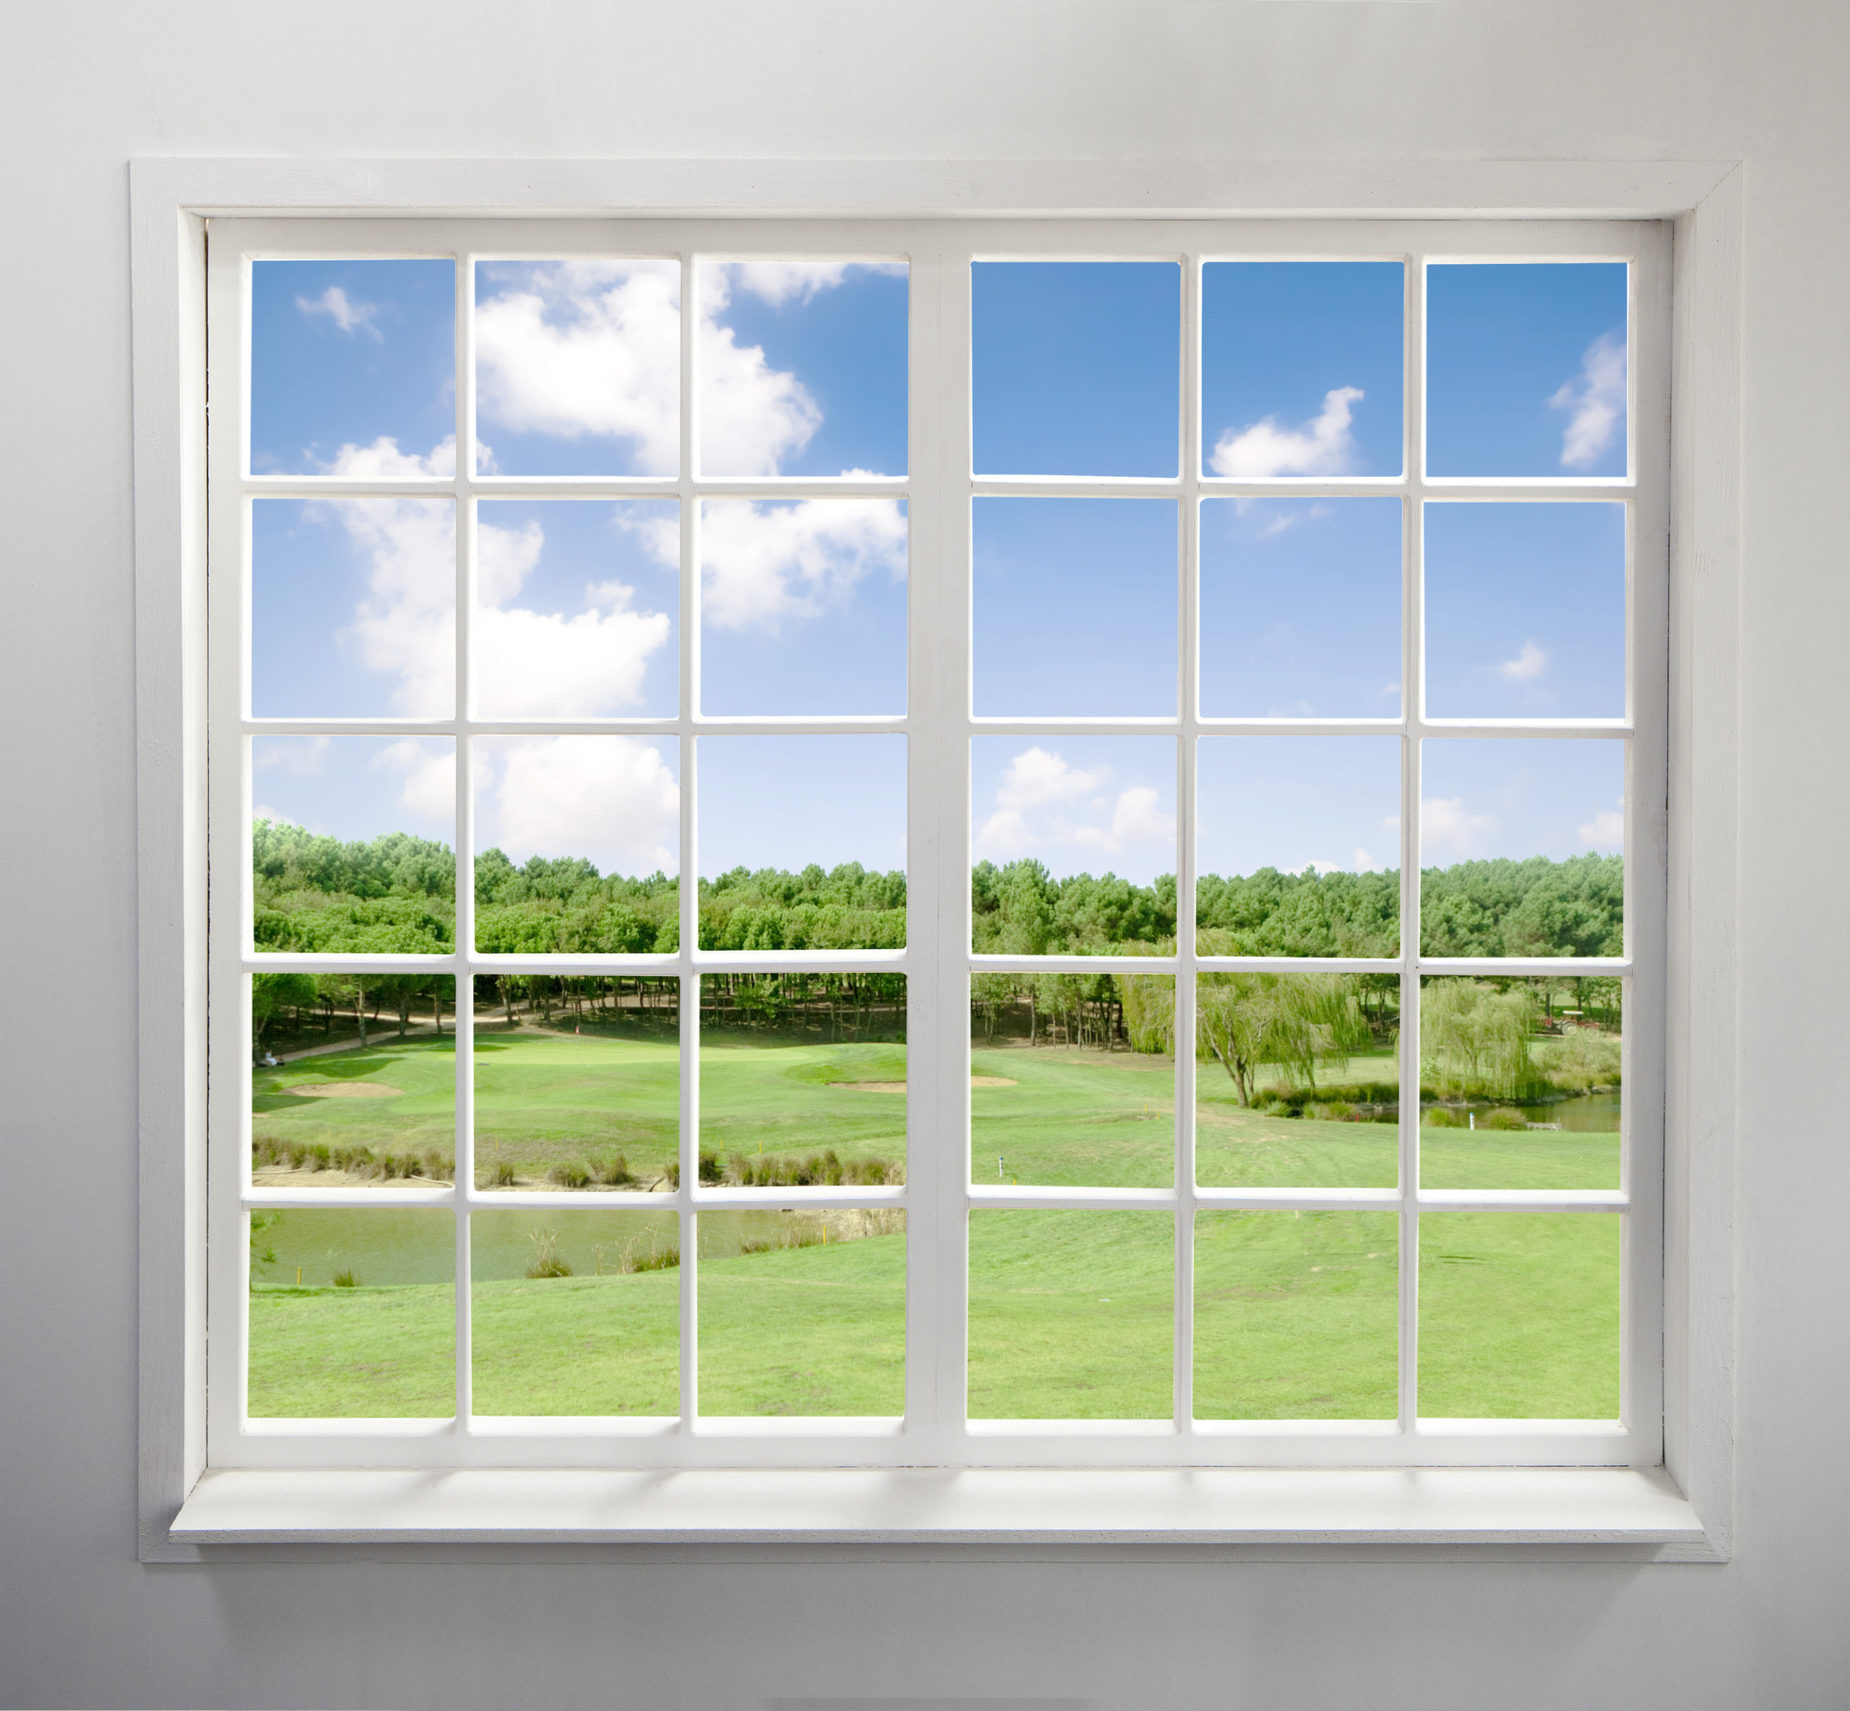 Frosted Glass Pane Online Clearance, Save 40% | jlcatj.gob.mx